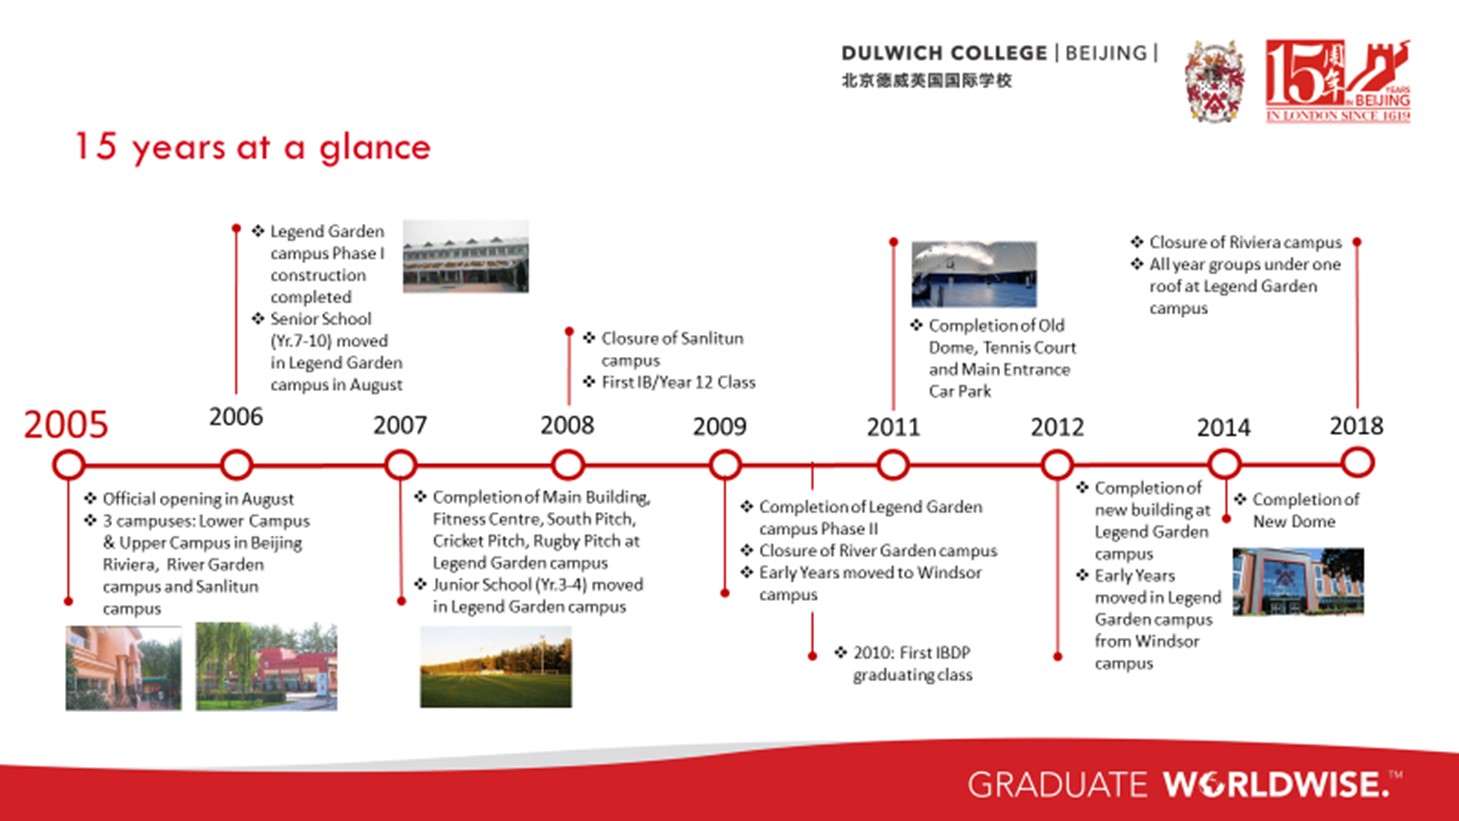 15 years at a glance